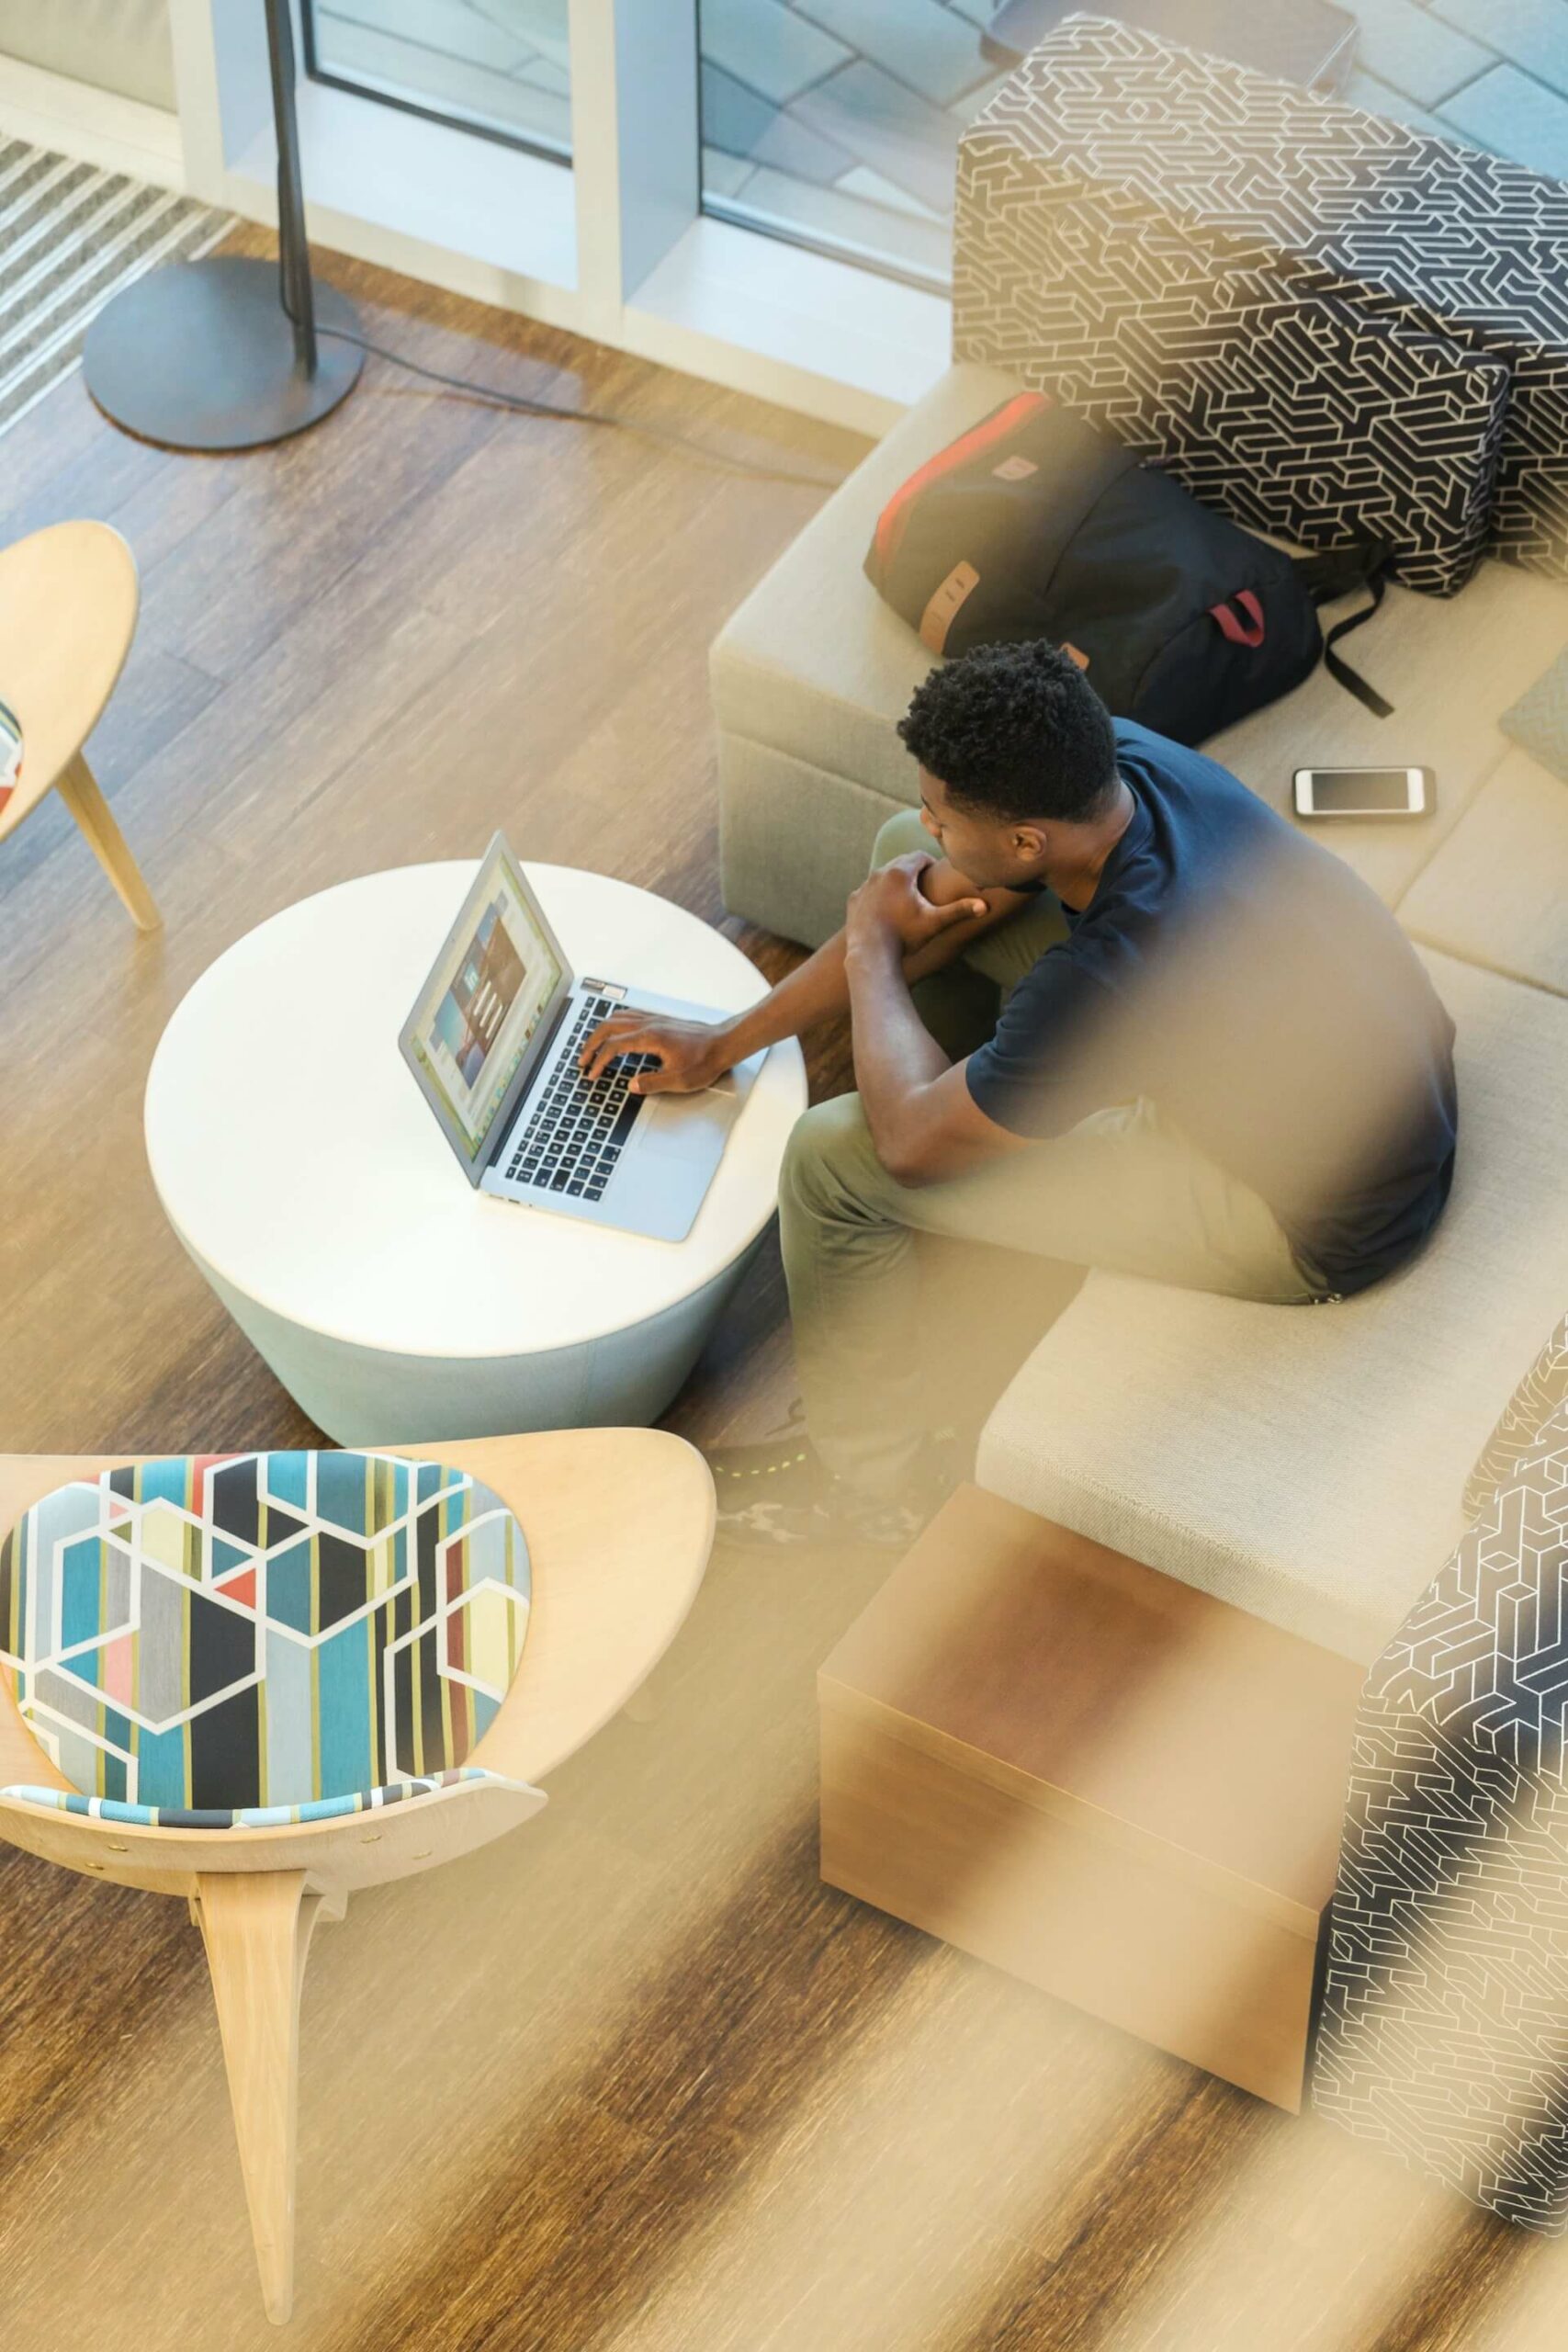 The 5 Best Business Lounges for Getting Work Done